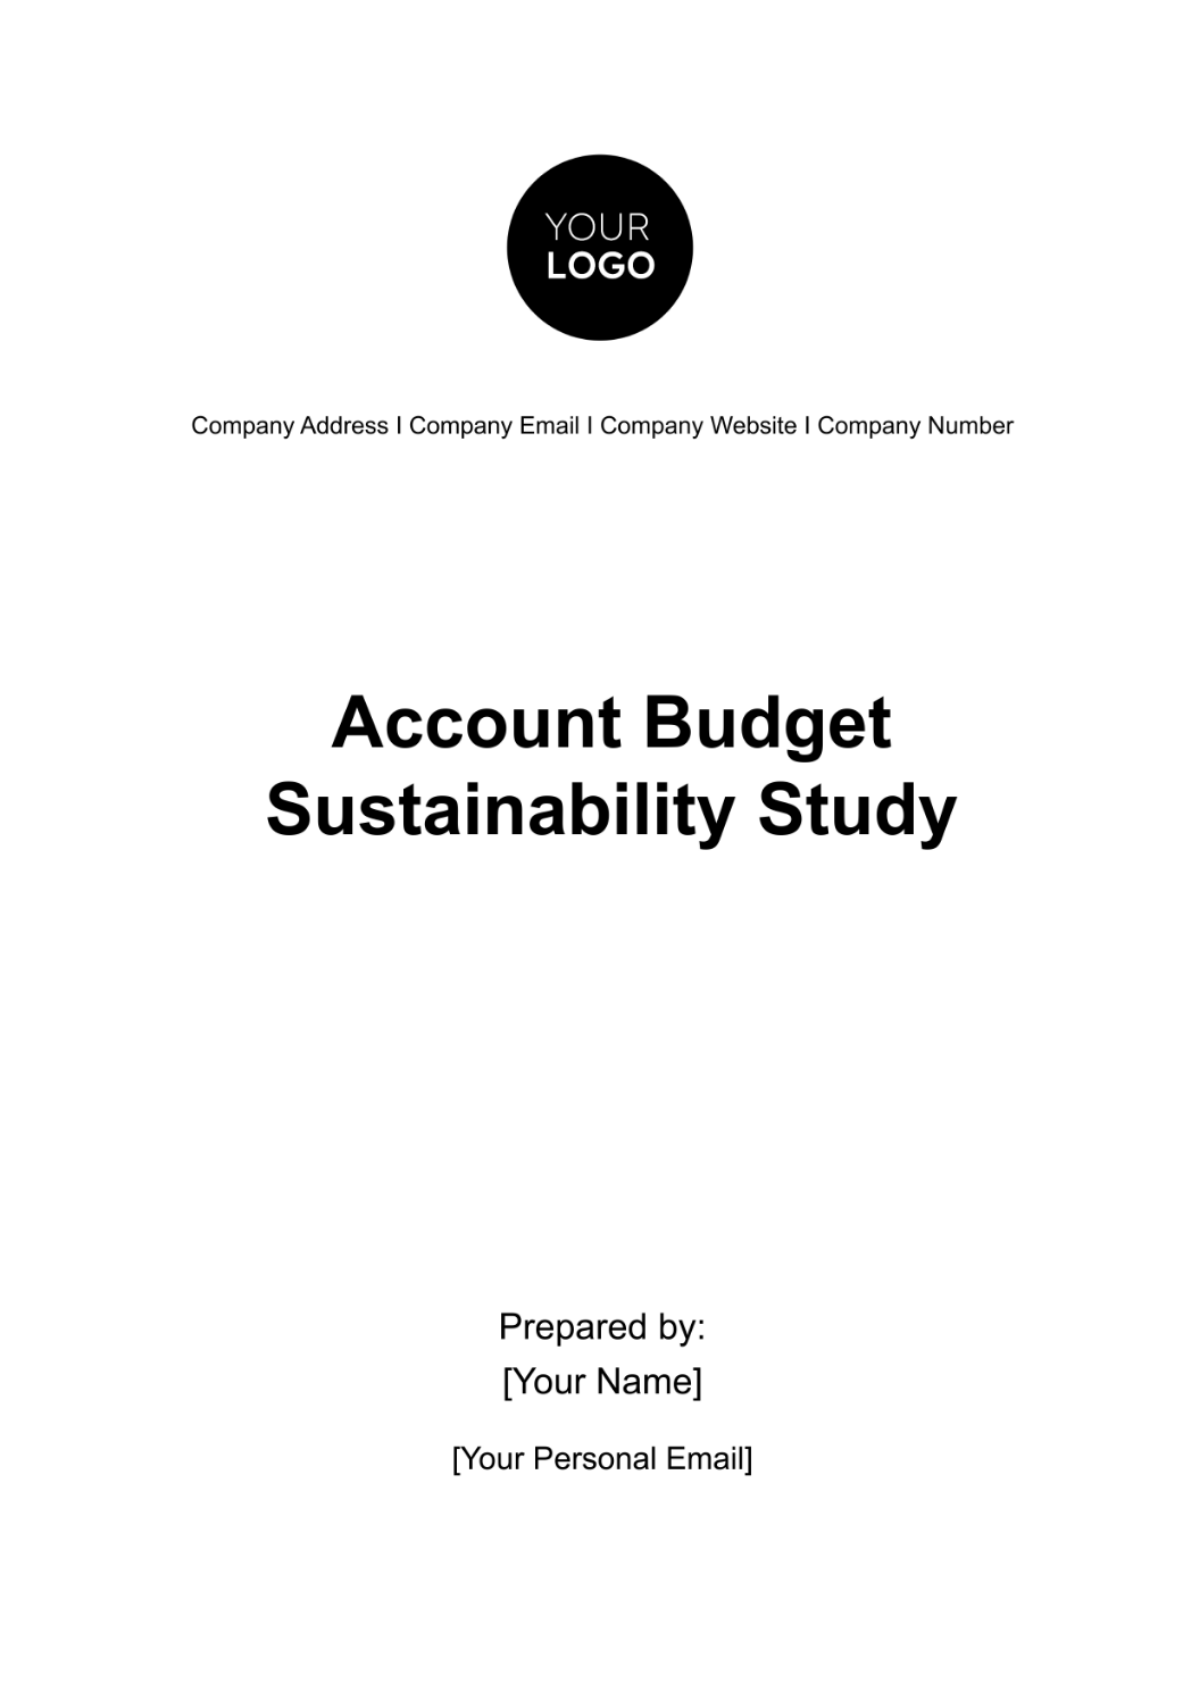 Free Account Budget Sustainability Study Template